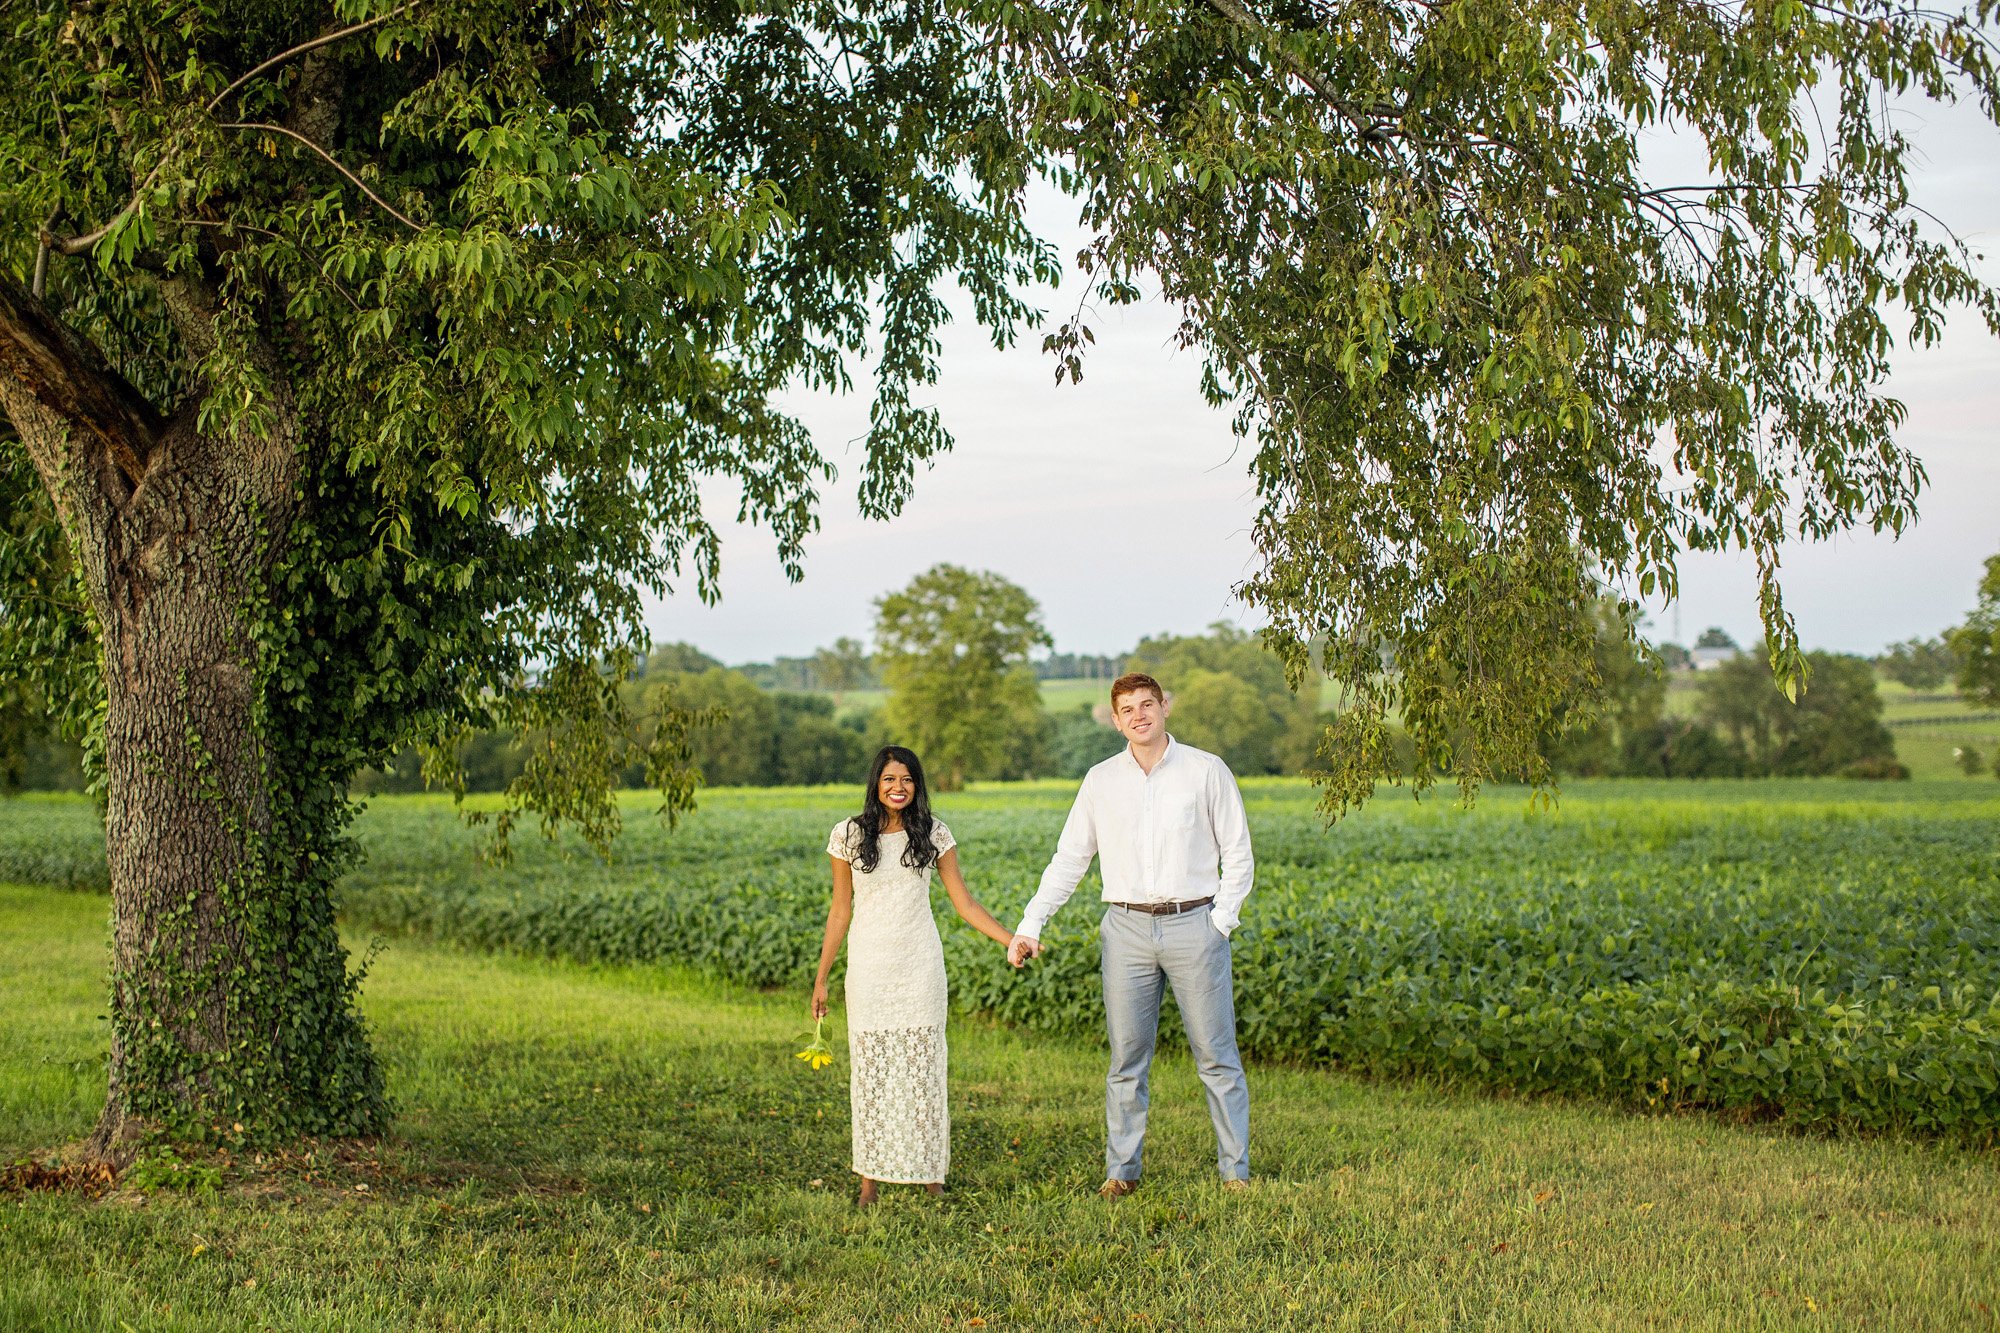 Seriously_Sabrina_Photography_Lexington_Midway_Kentucky_Engagement_Merefield_Sunflowers_Naz_and_Drew25.jpg